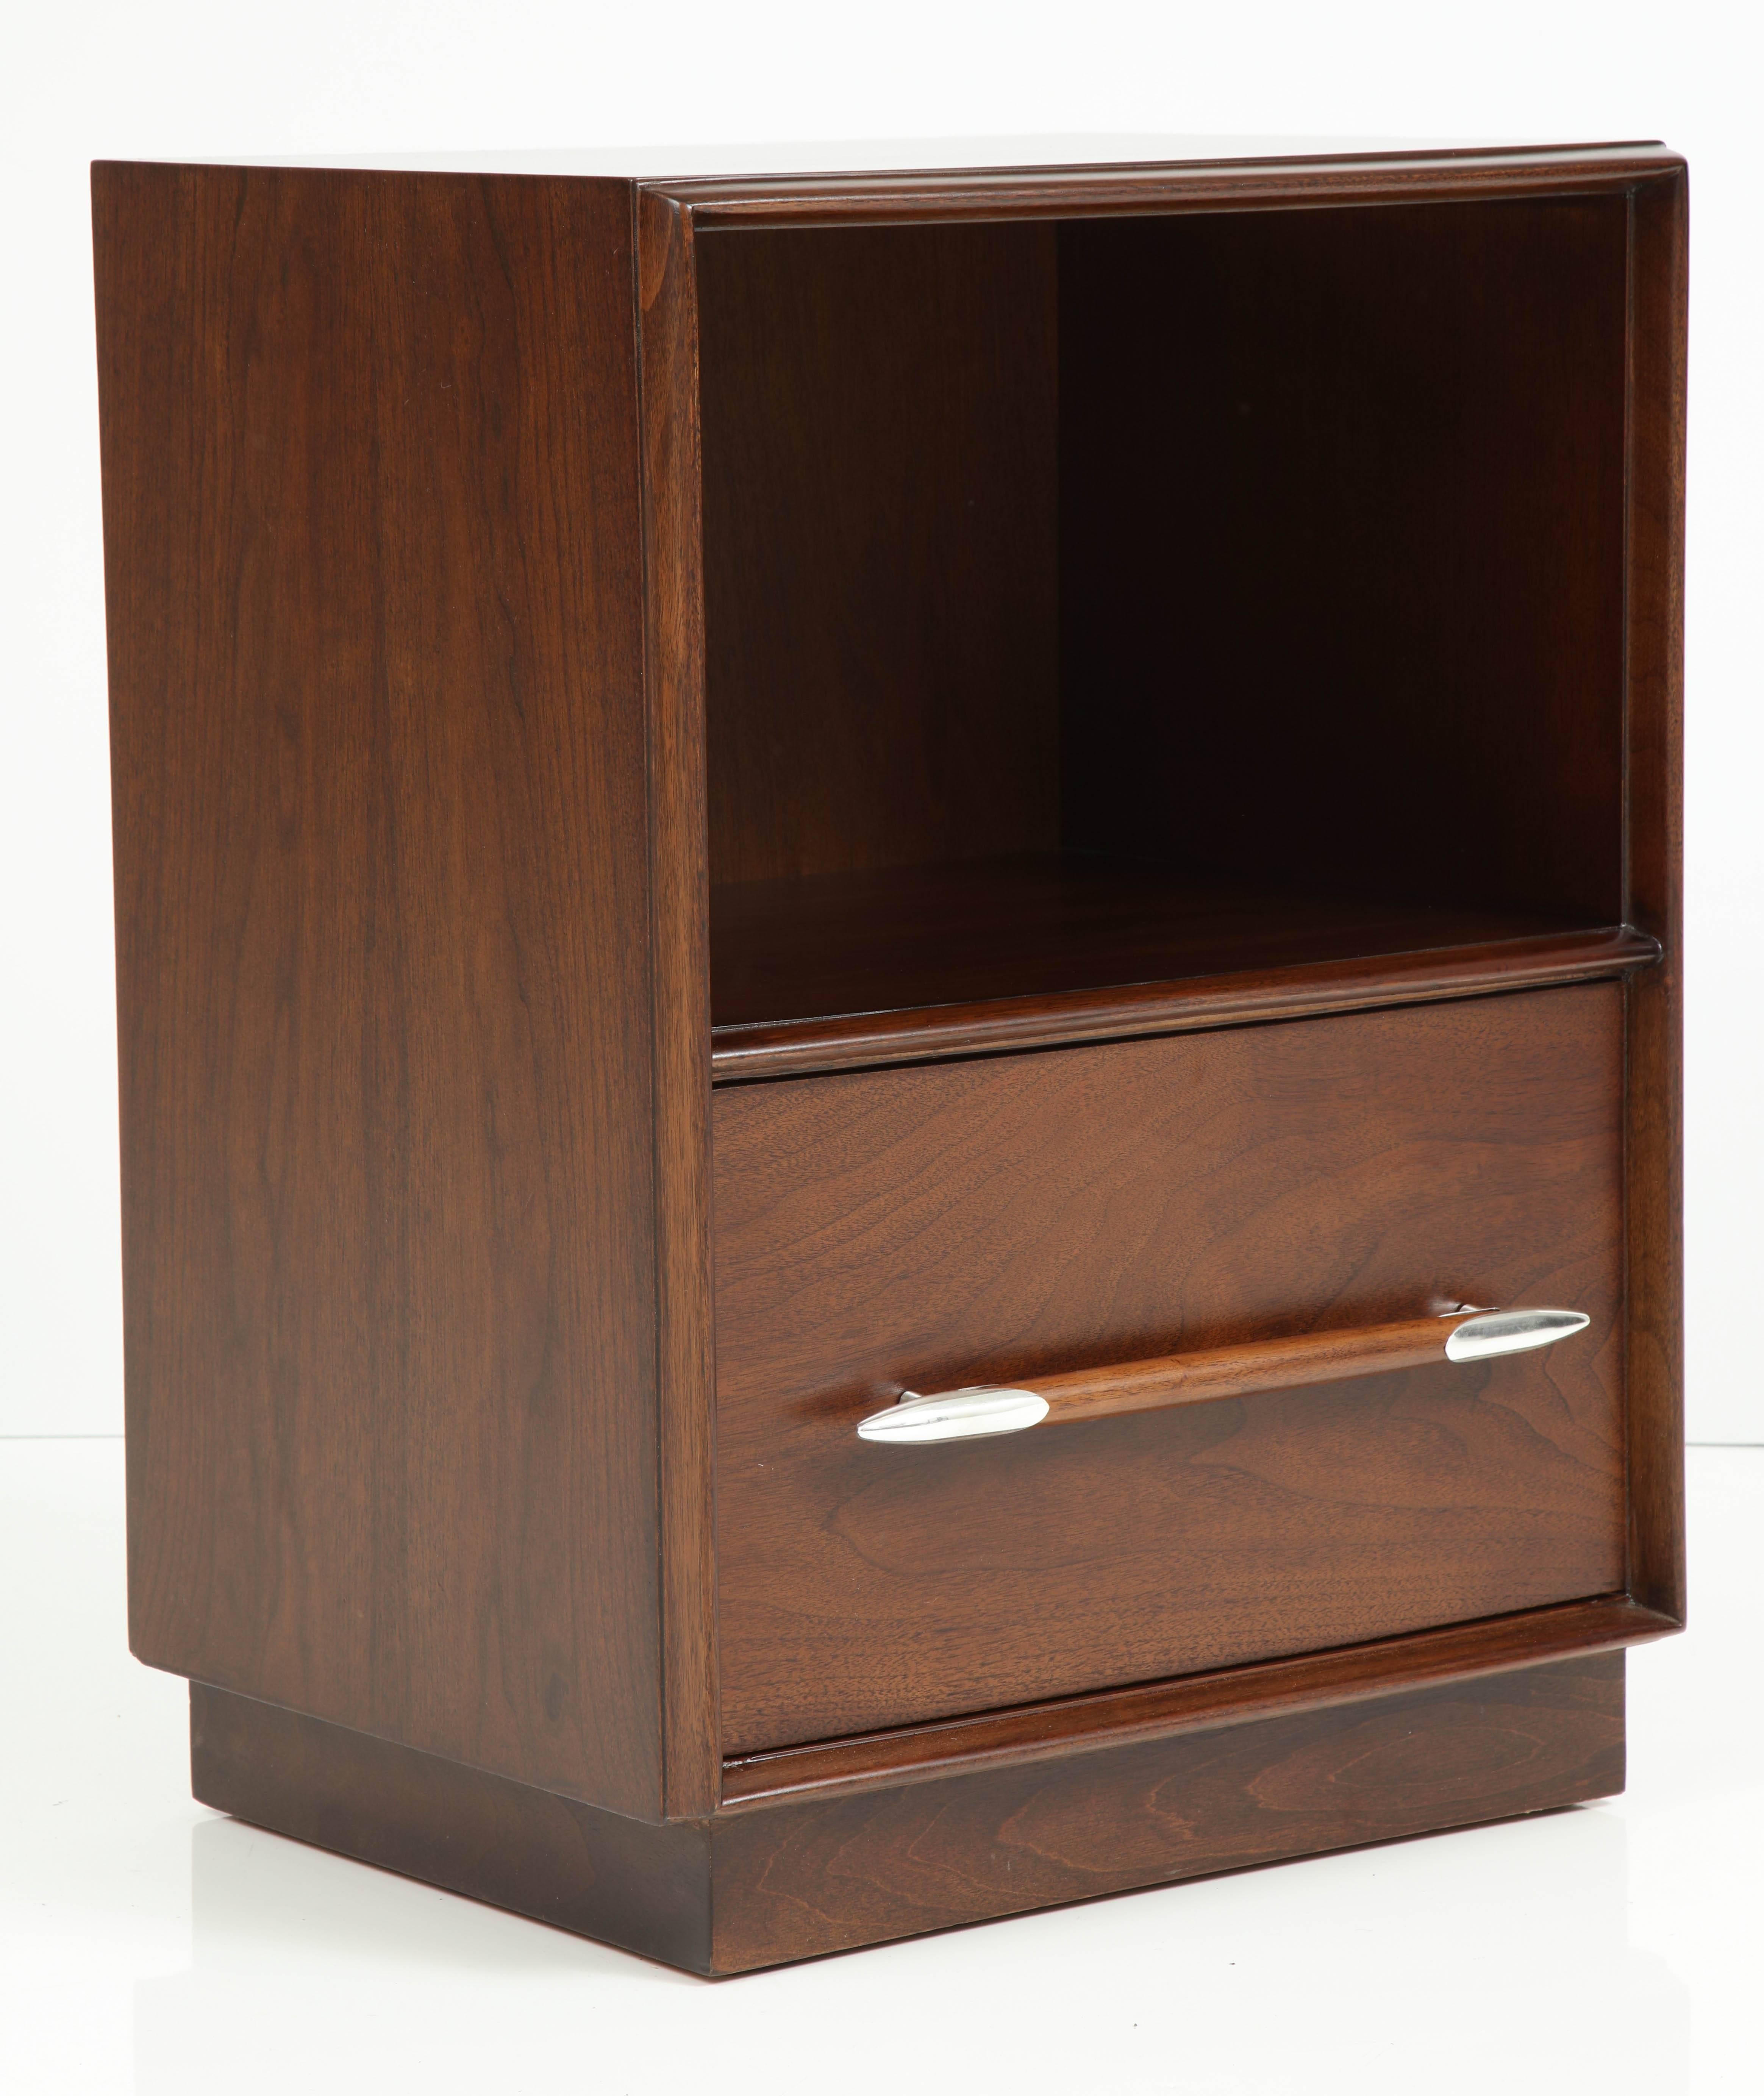 Pair of Mid-Century Classic spear handle nightstands designed by T.H. Robsjohn-Gibbings for Widdicomb. Nightstands have been mint restored with a rich tobacco brown stain and polished nickel points.